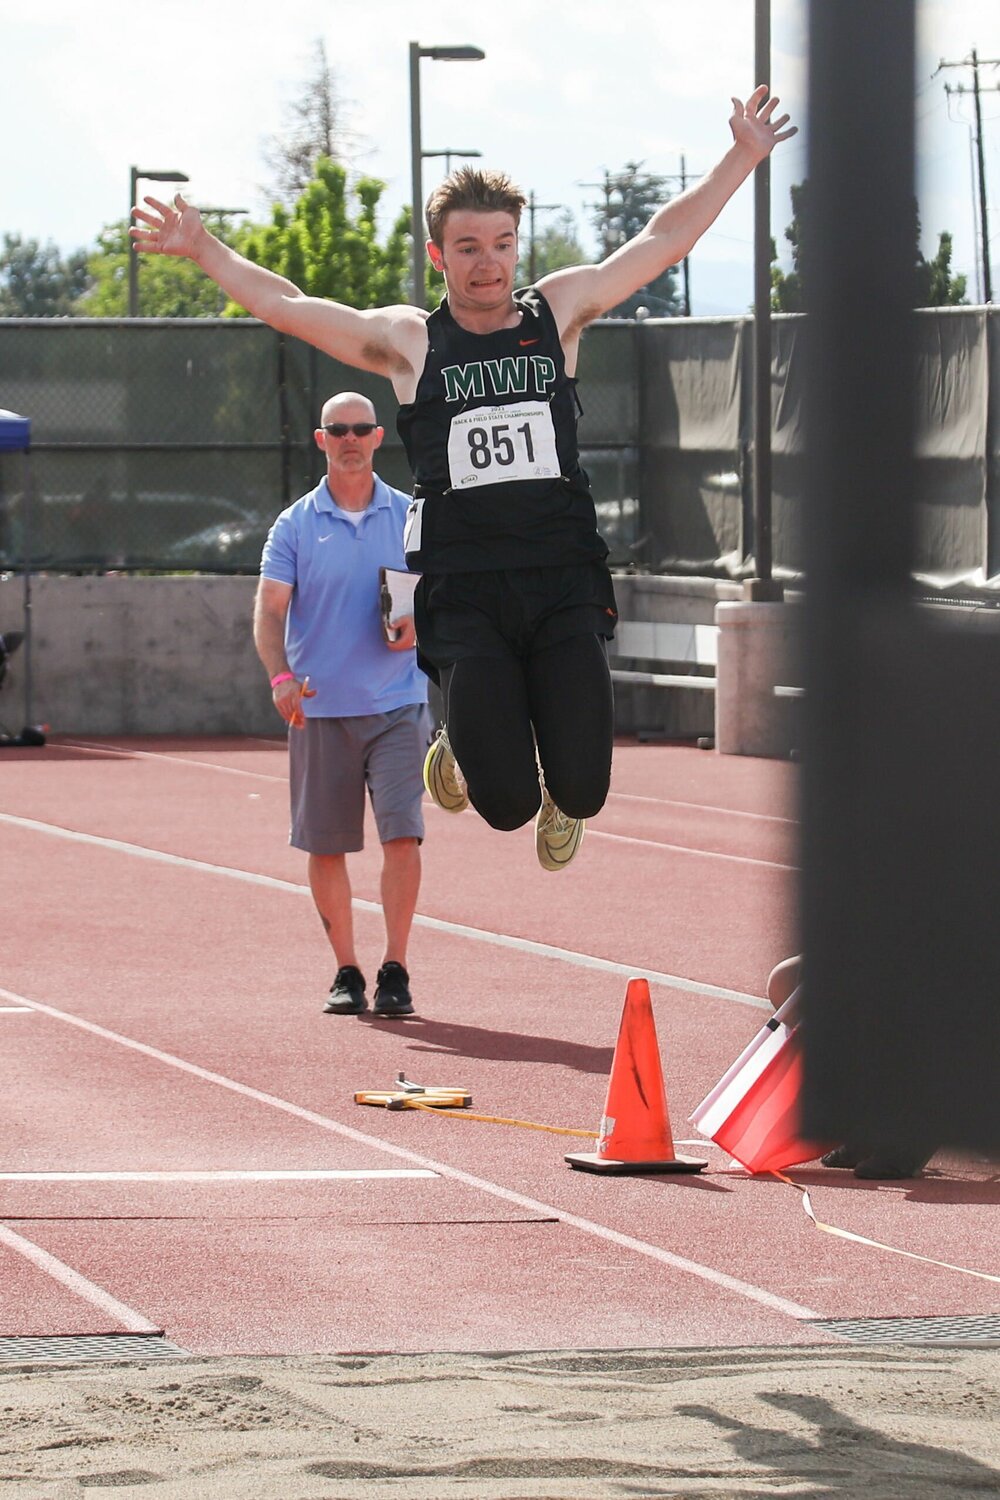 MWP's Tony Belgiorno takes on the long jump during the 2B state track and field championships, May 26 in Yakima.